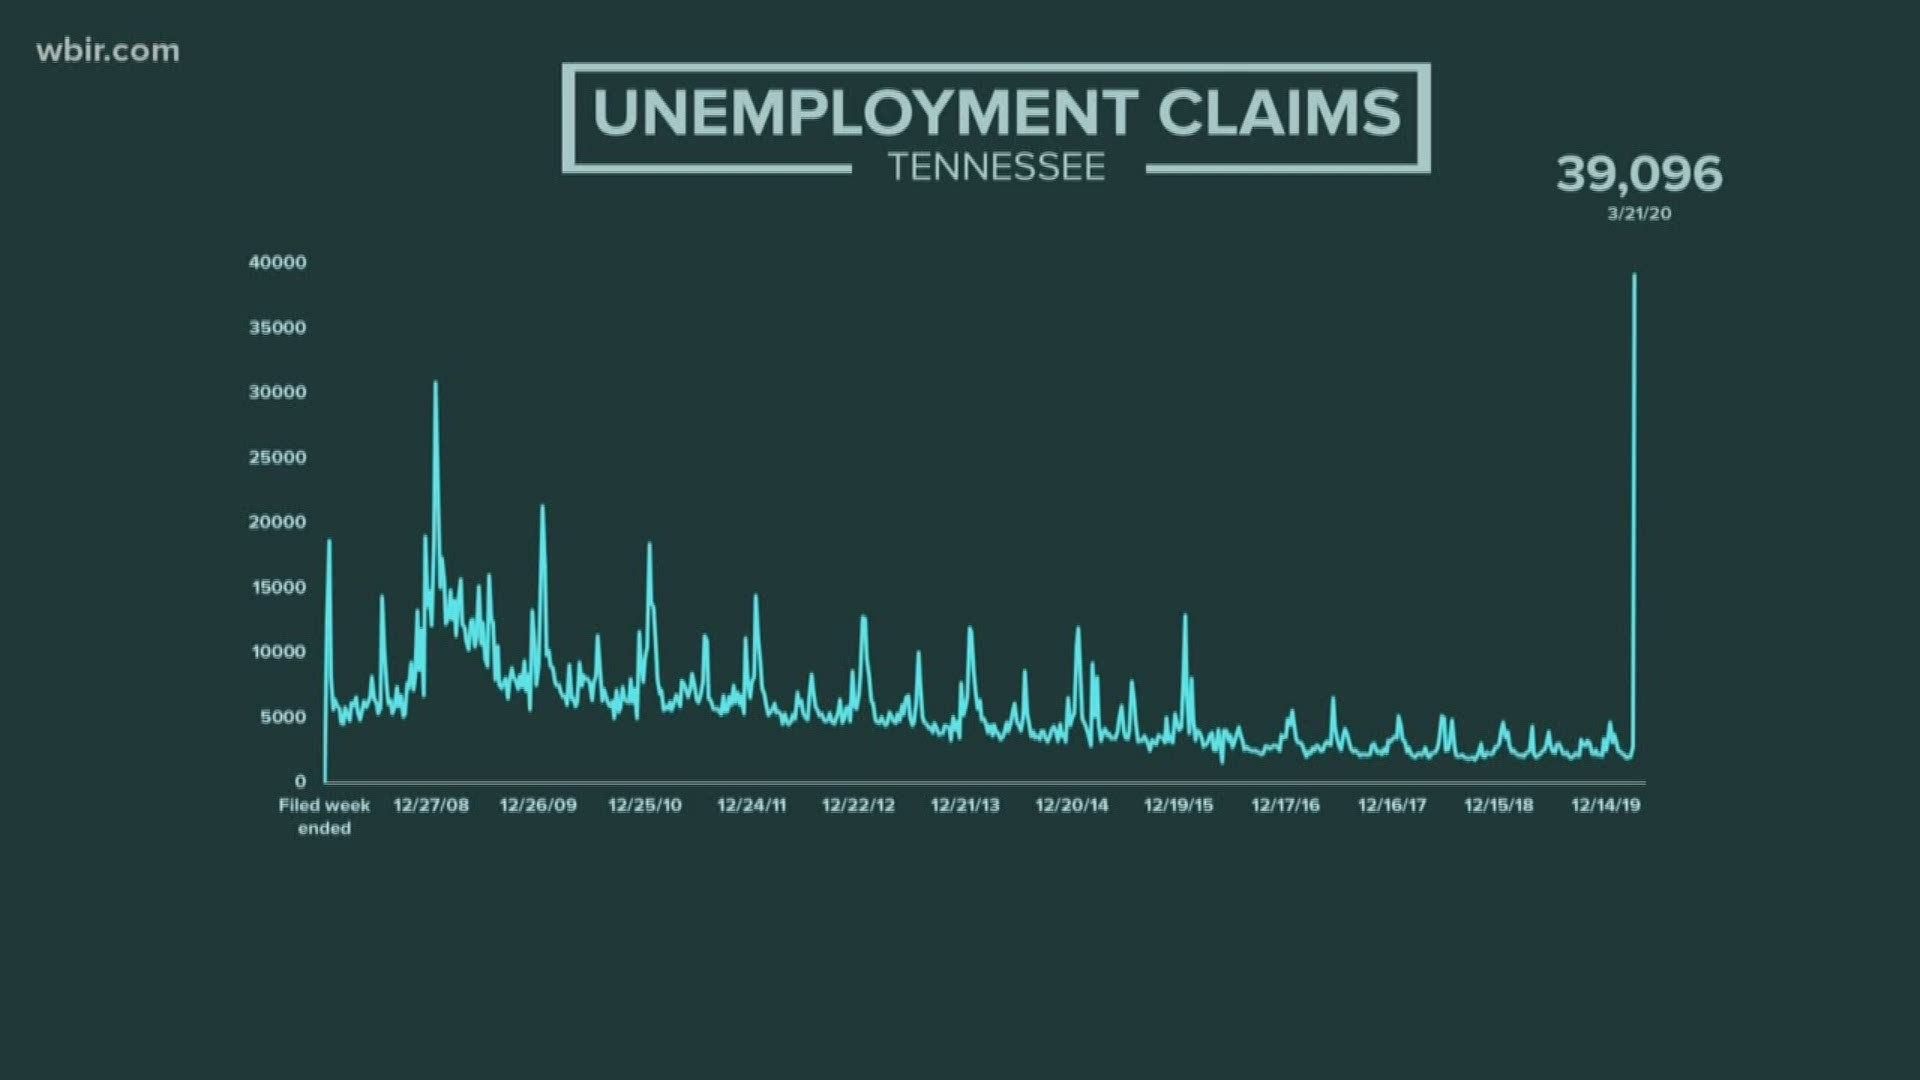 In Tennessee, more than 39,000 people filed for unemployment last week.